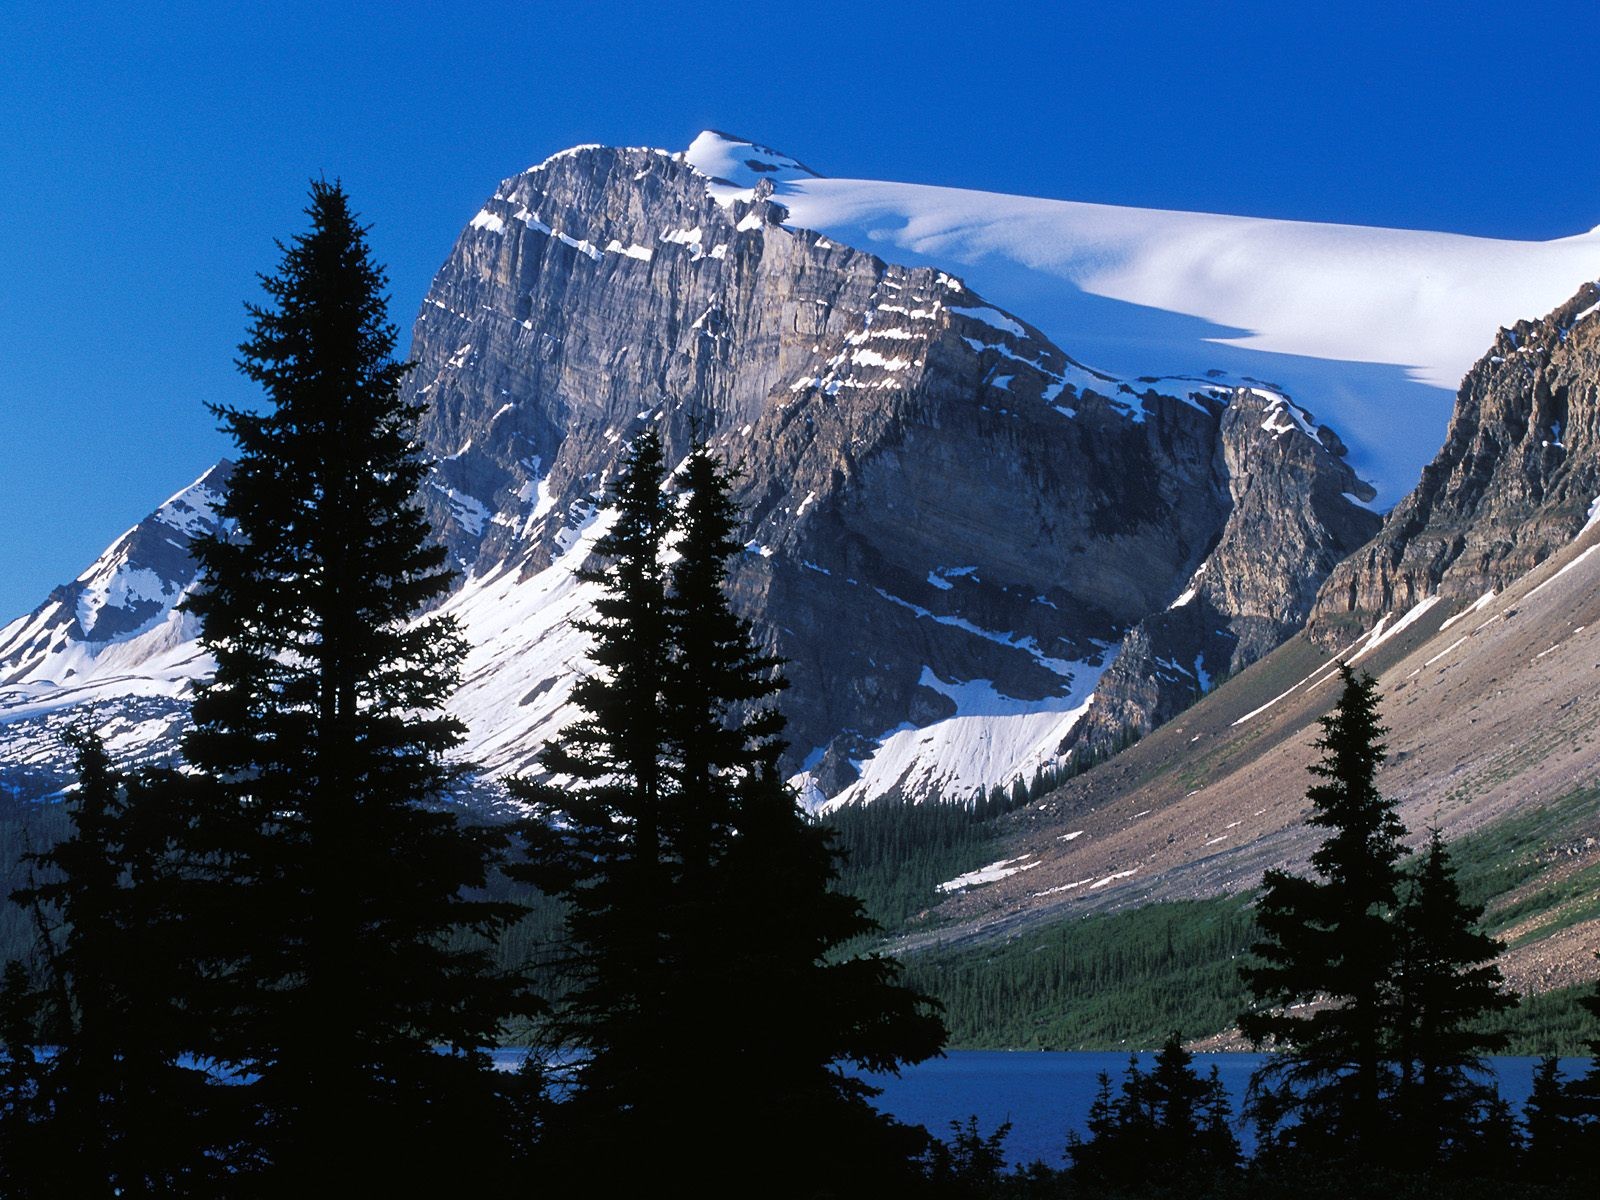 General 1600x1200 mountains landscape national park Canada cliff snowy mountain